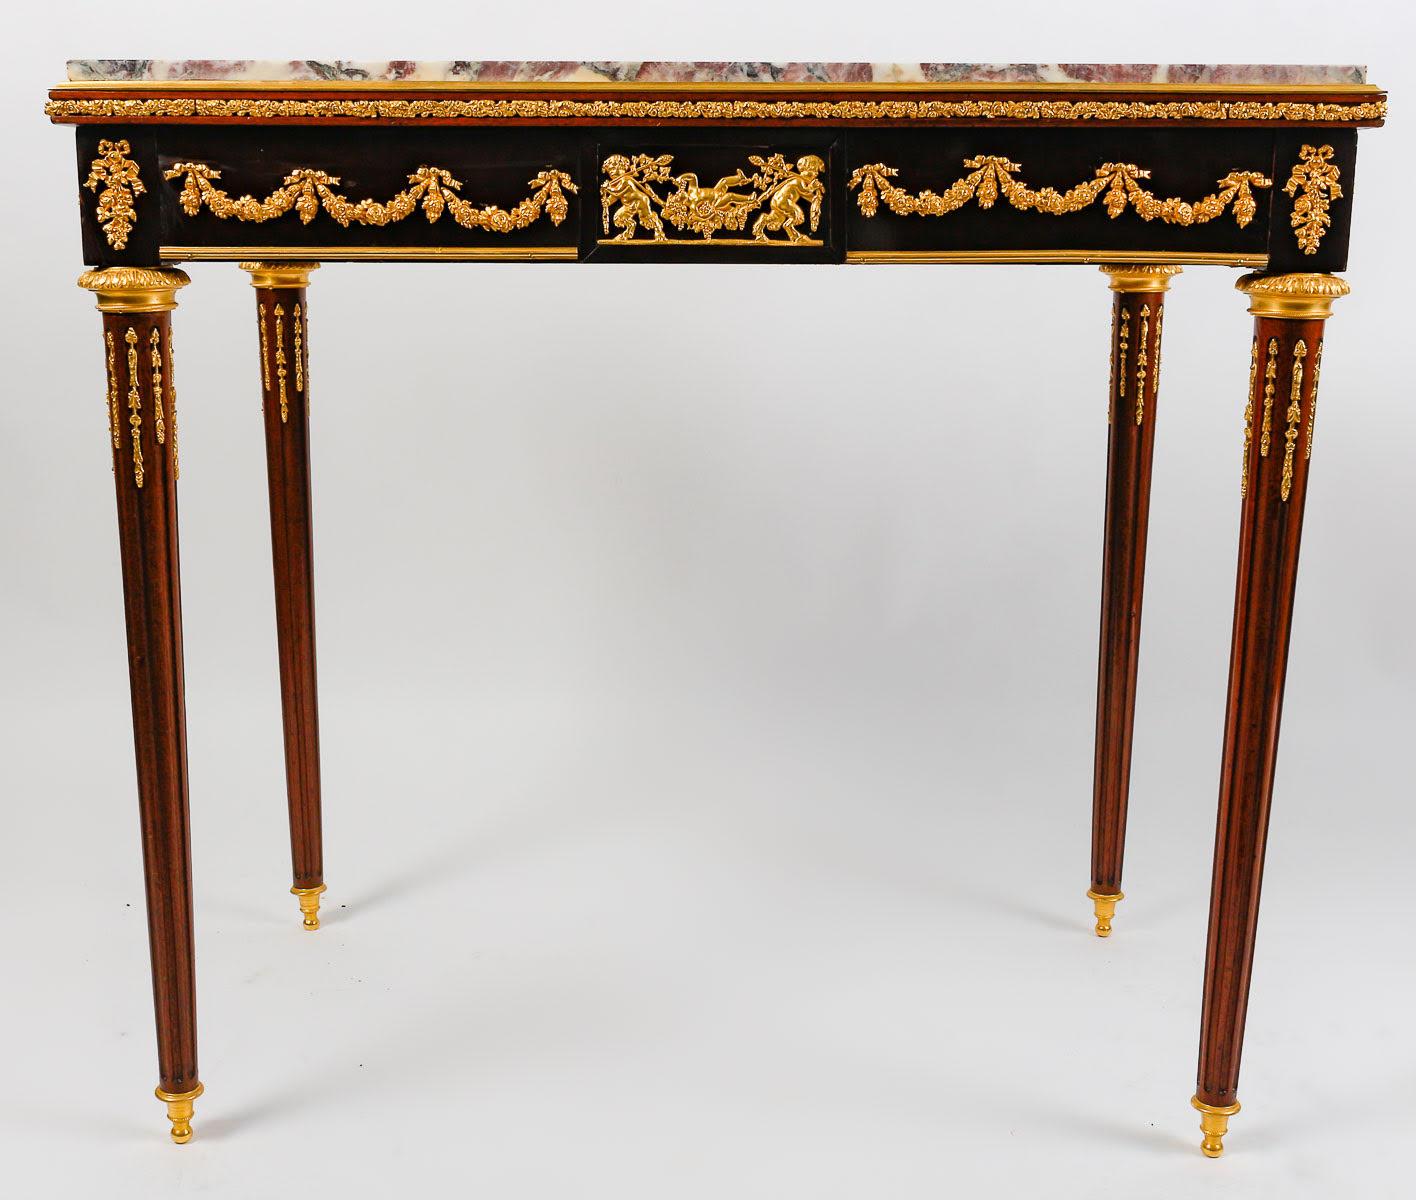 Centre table, small desk 19th century, Napoleon III period.

Centre table, small desk in the style of François Linke, 19th century work, Napoleon III period, gilt bronze and marble top, drawer in the waist.  

H: 76cm, W: 84cm, D: 51cm